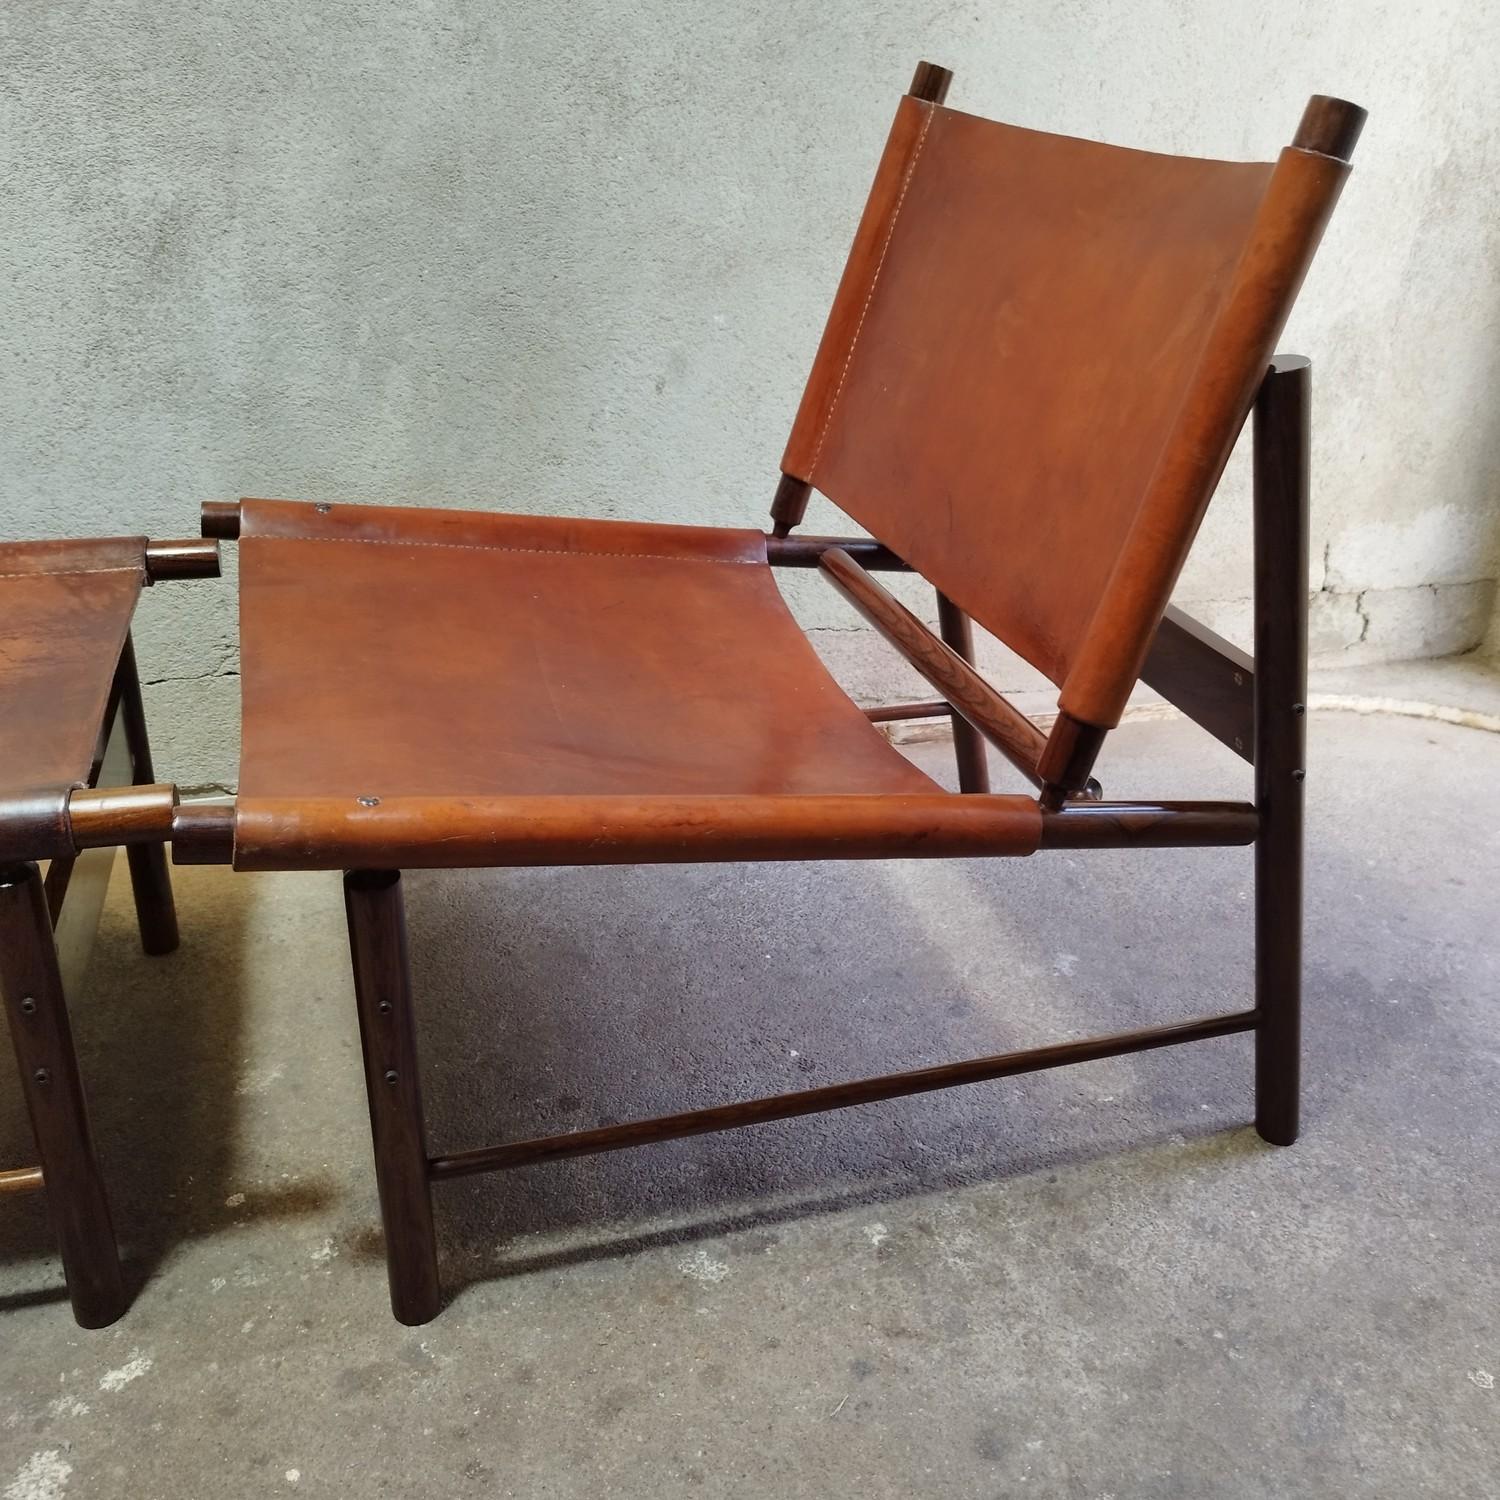 Armchair and rare ottoman by Jorge Zalszupin, Brazil, 1950's. Zalszupin, a native Polish, became an architect in Paris, before immigrating to Brazil in 1949 influenced by the works of Oscar Niemeyer.
The armchair are in very good condition, the